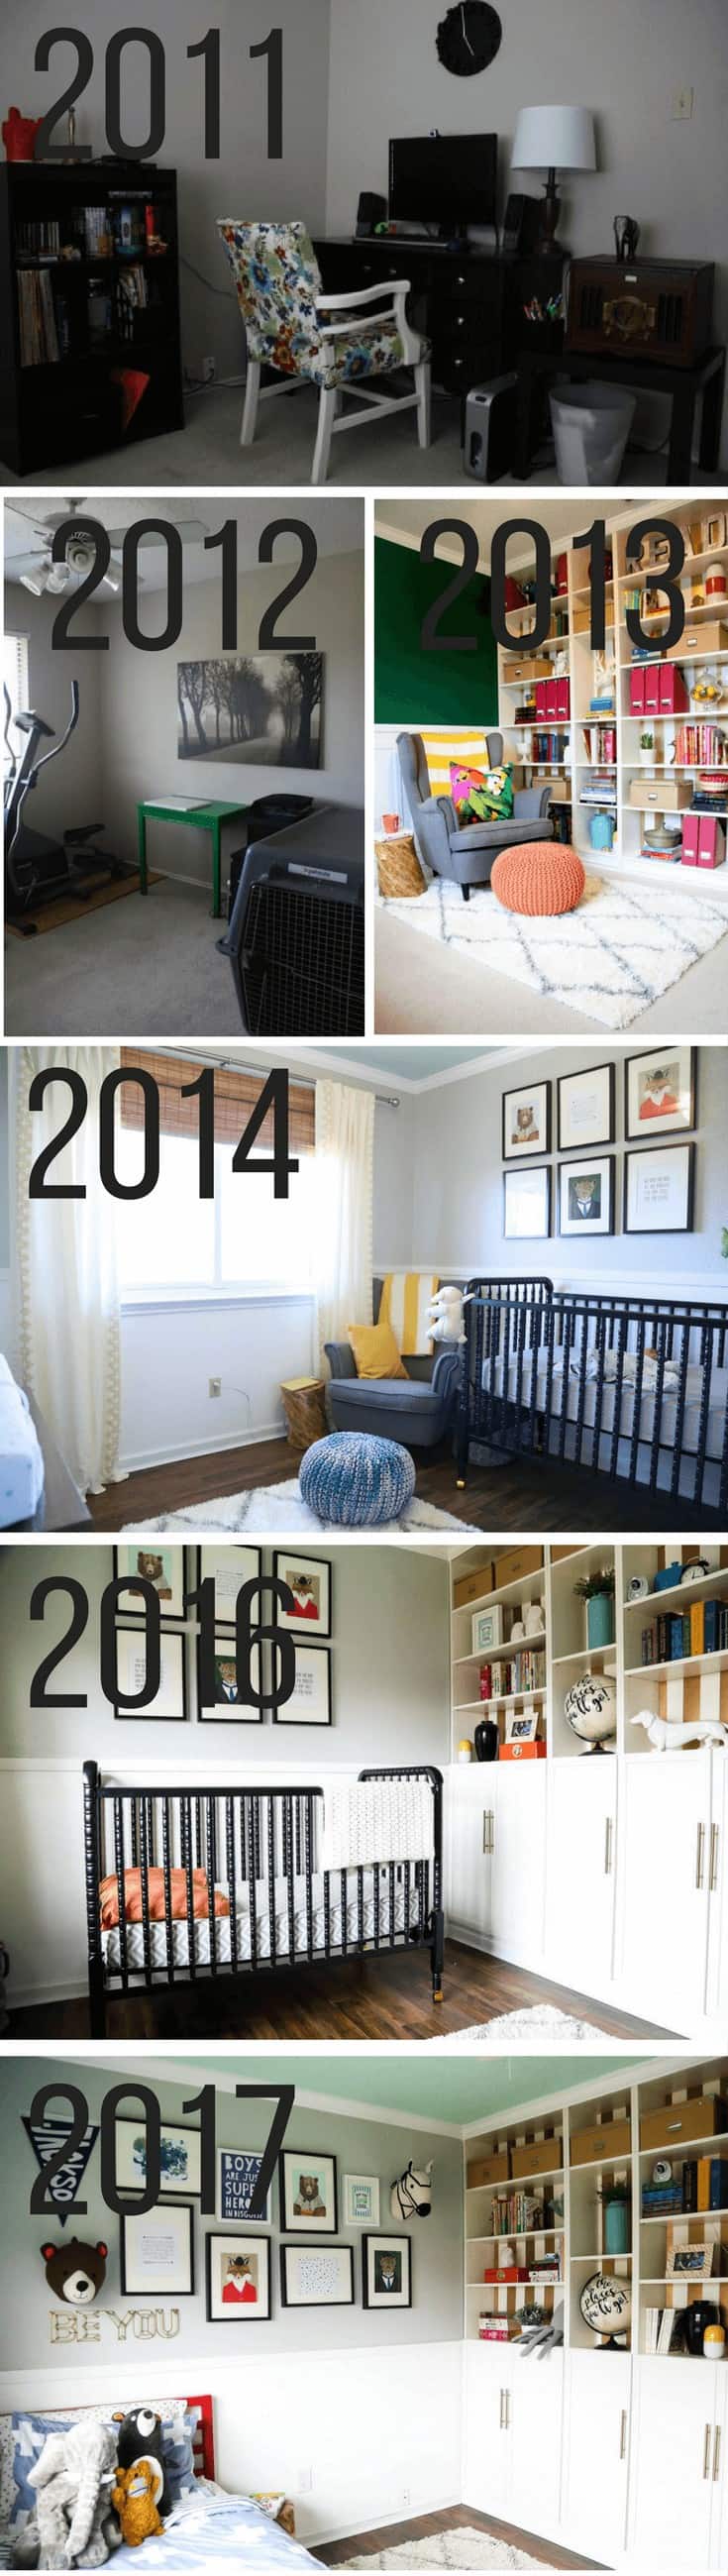 A kids room makeover - renovation from nursery to big kid room